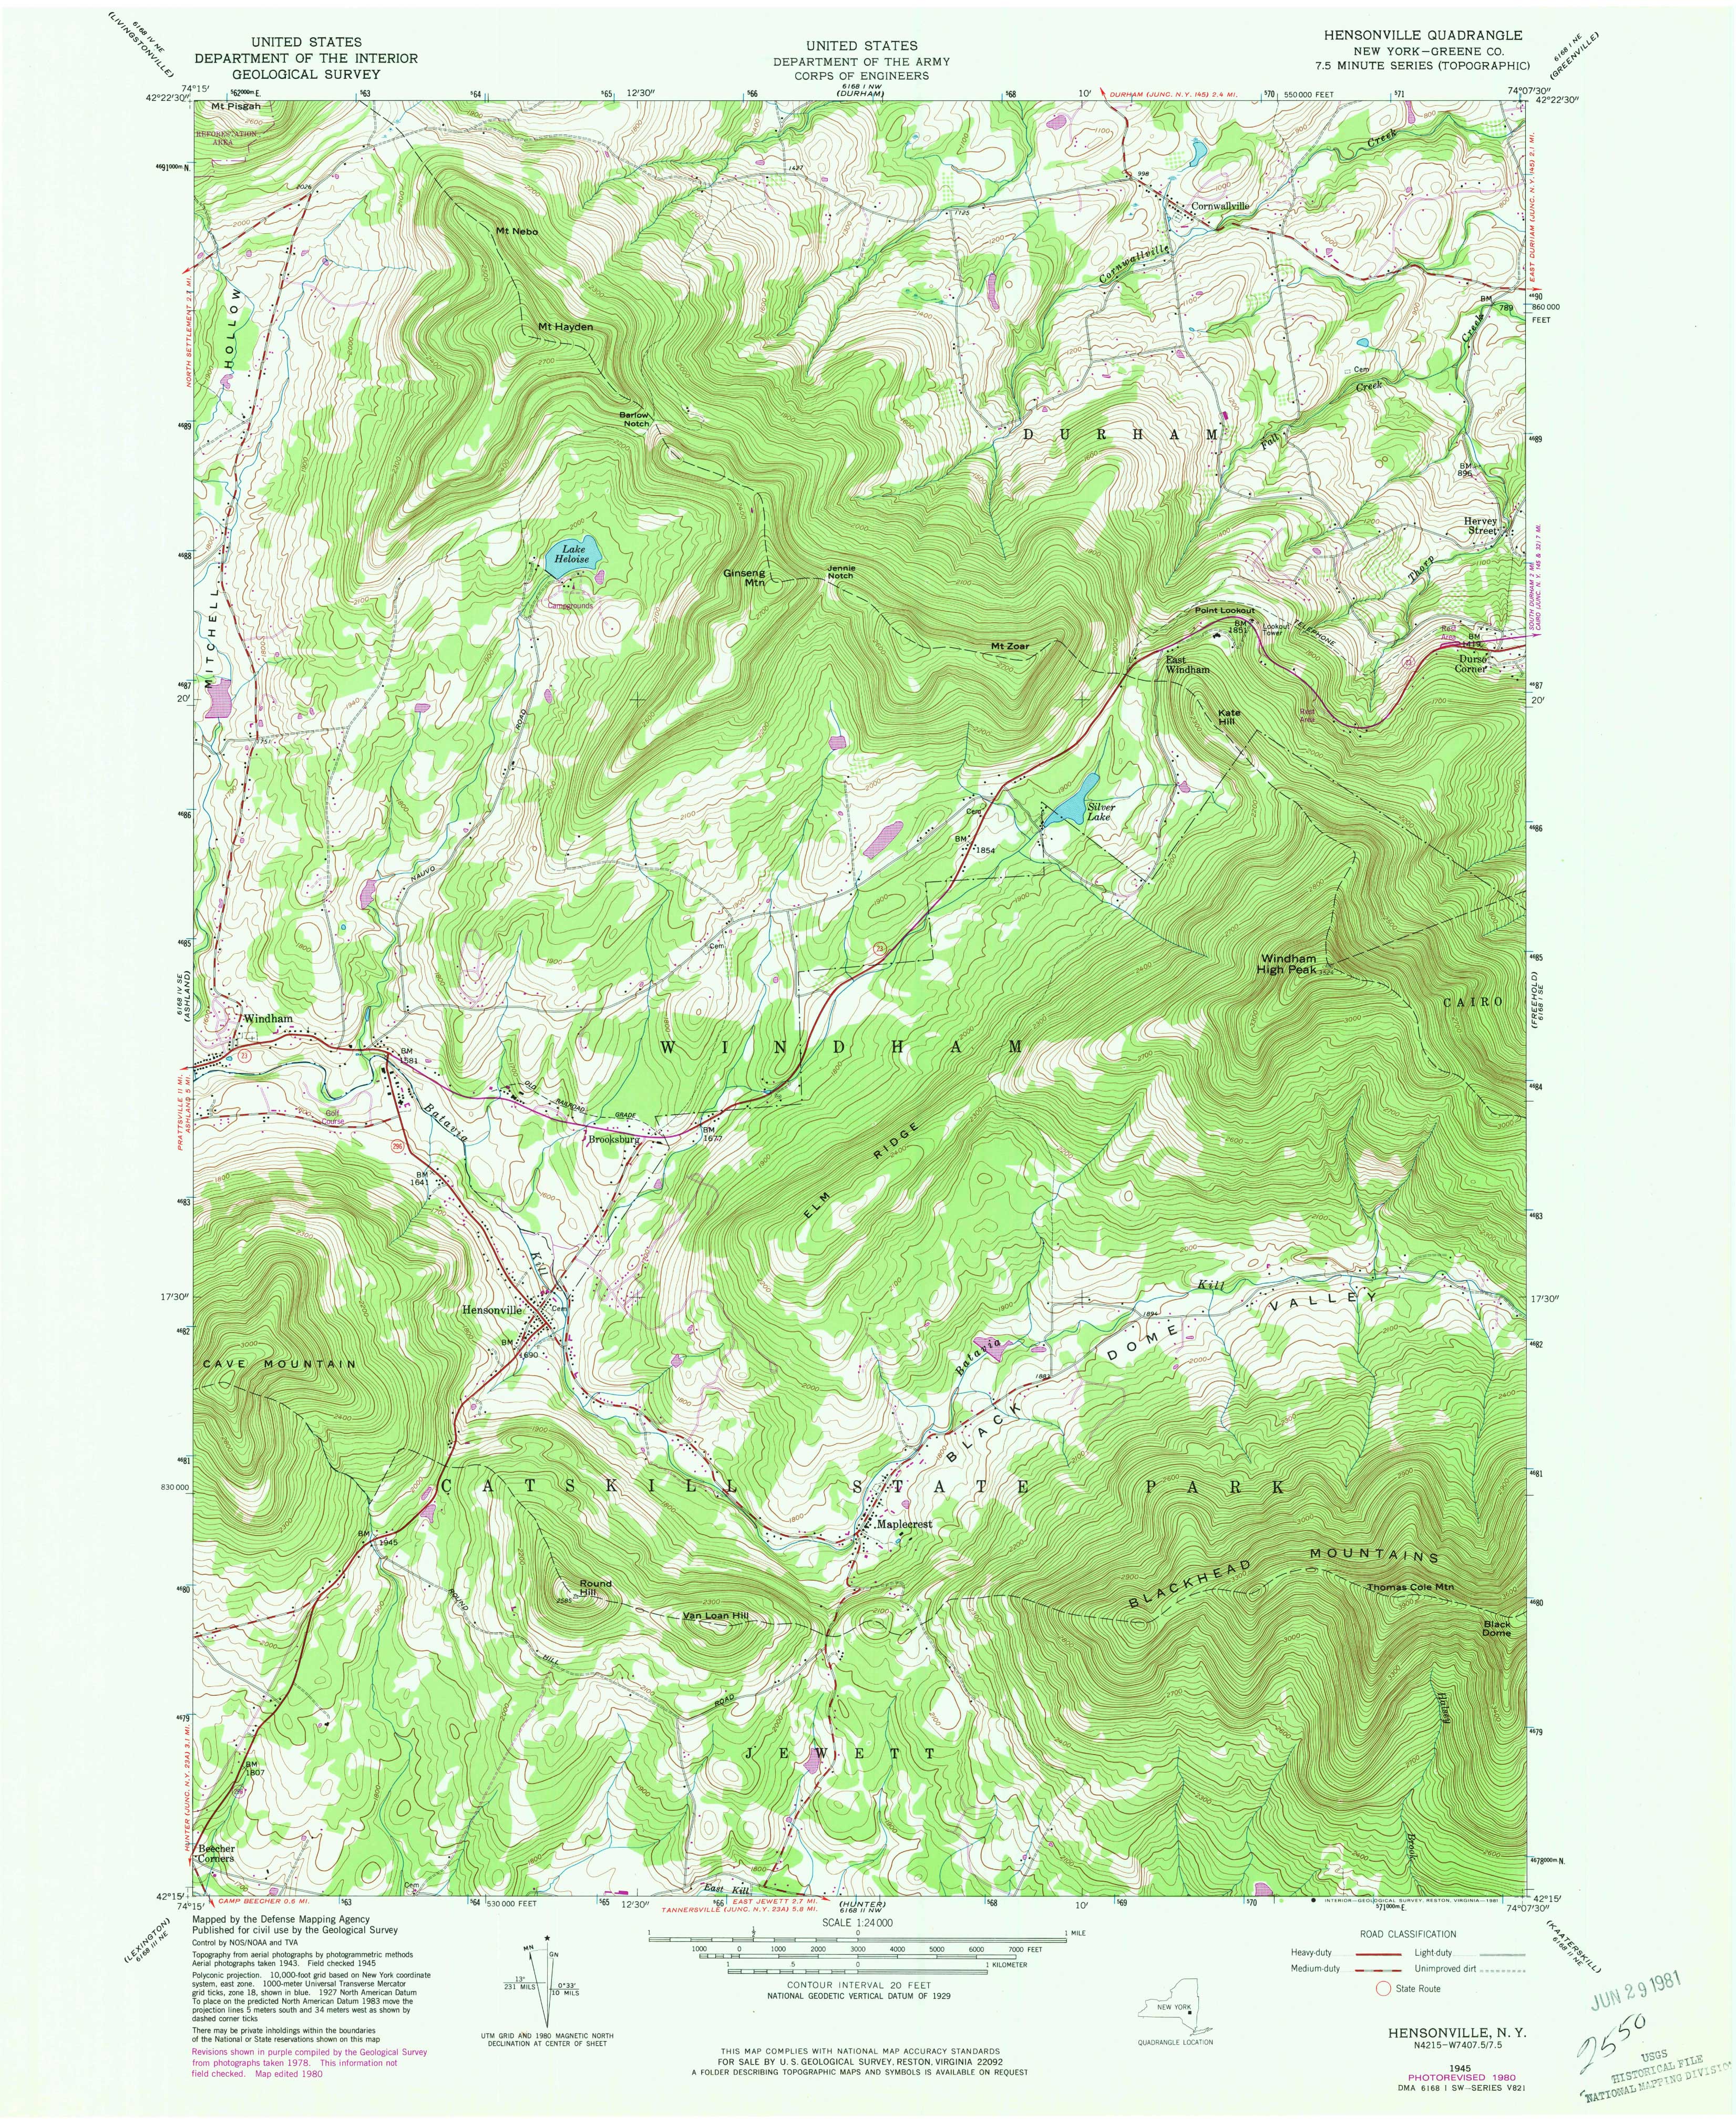 1980 USGS topographical map of Hensonville